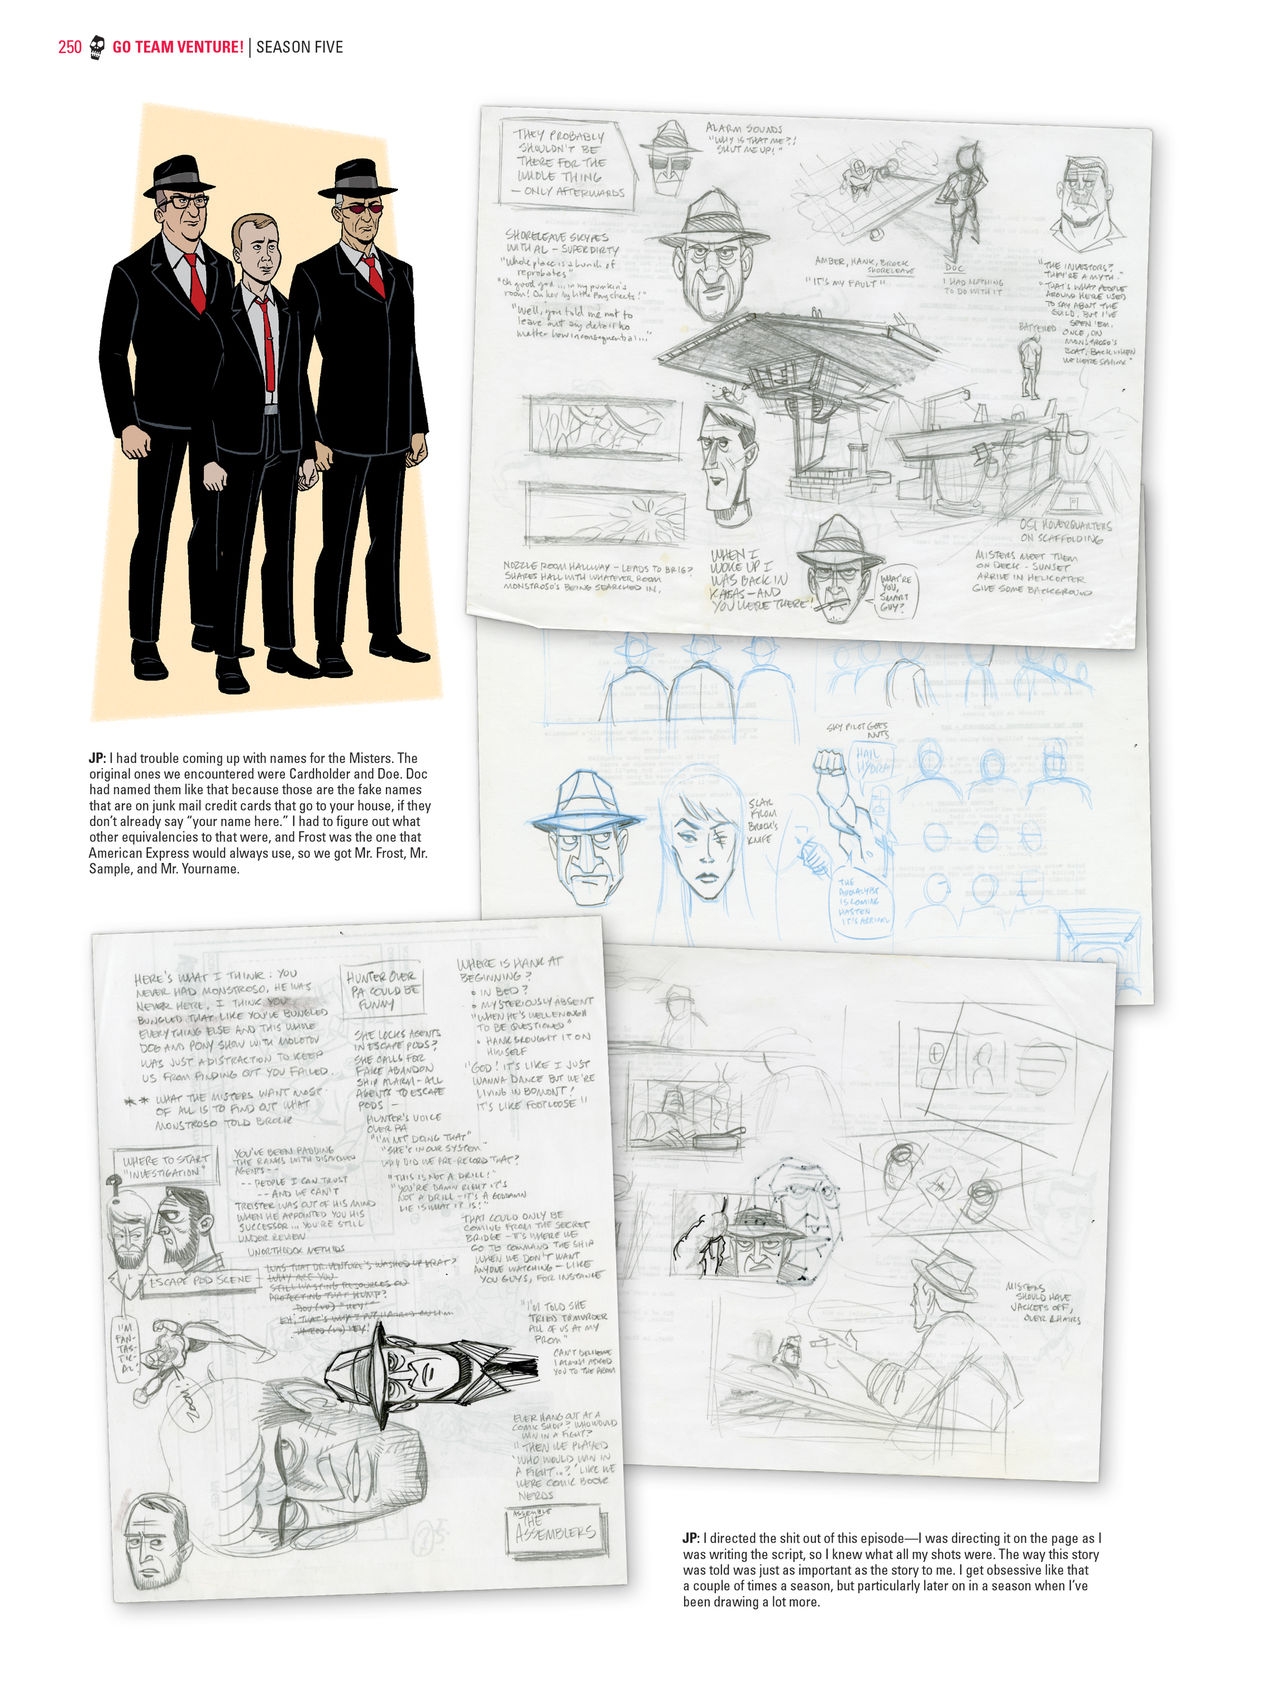 Go Team Venture! - The Art and Making of the Venture Bros 248